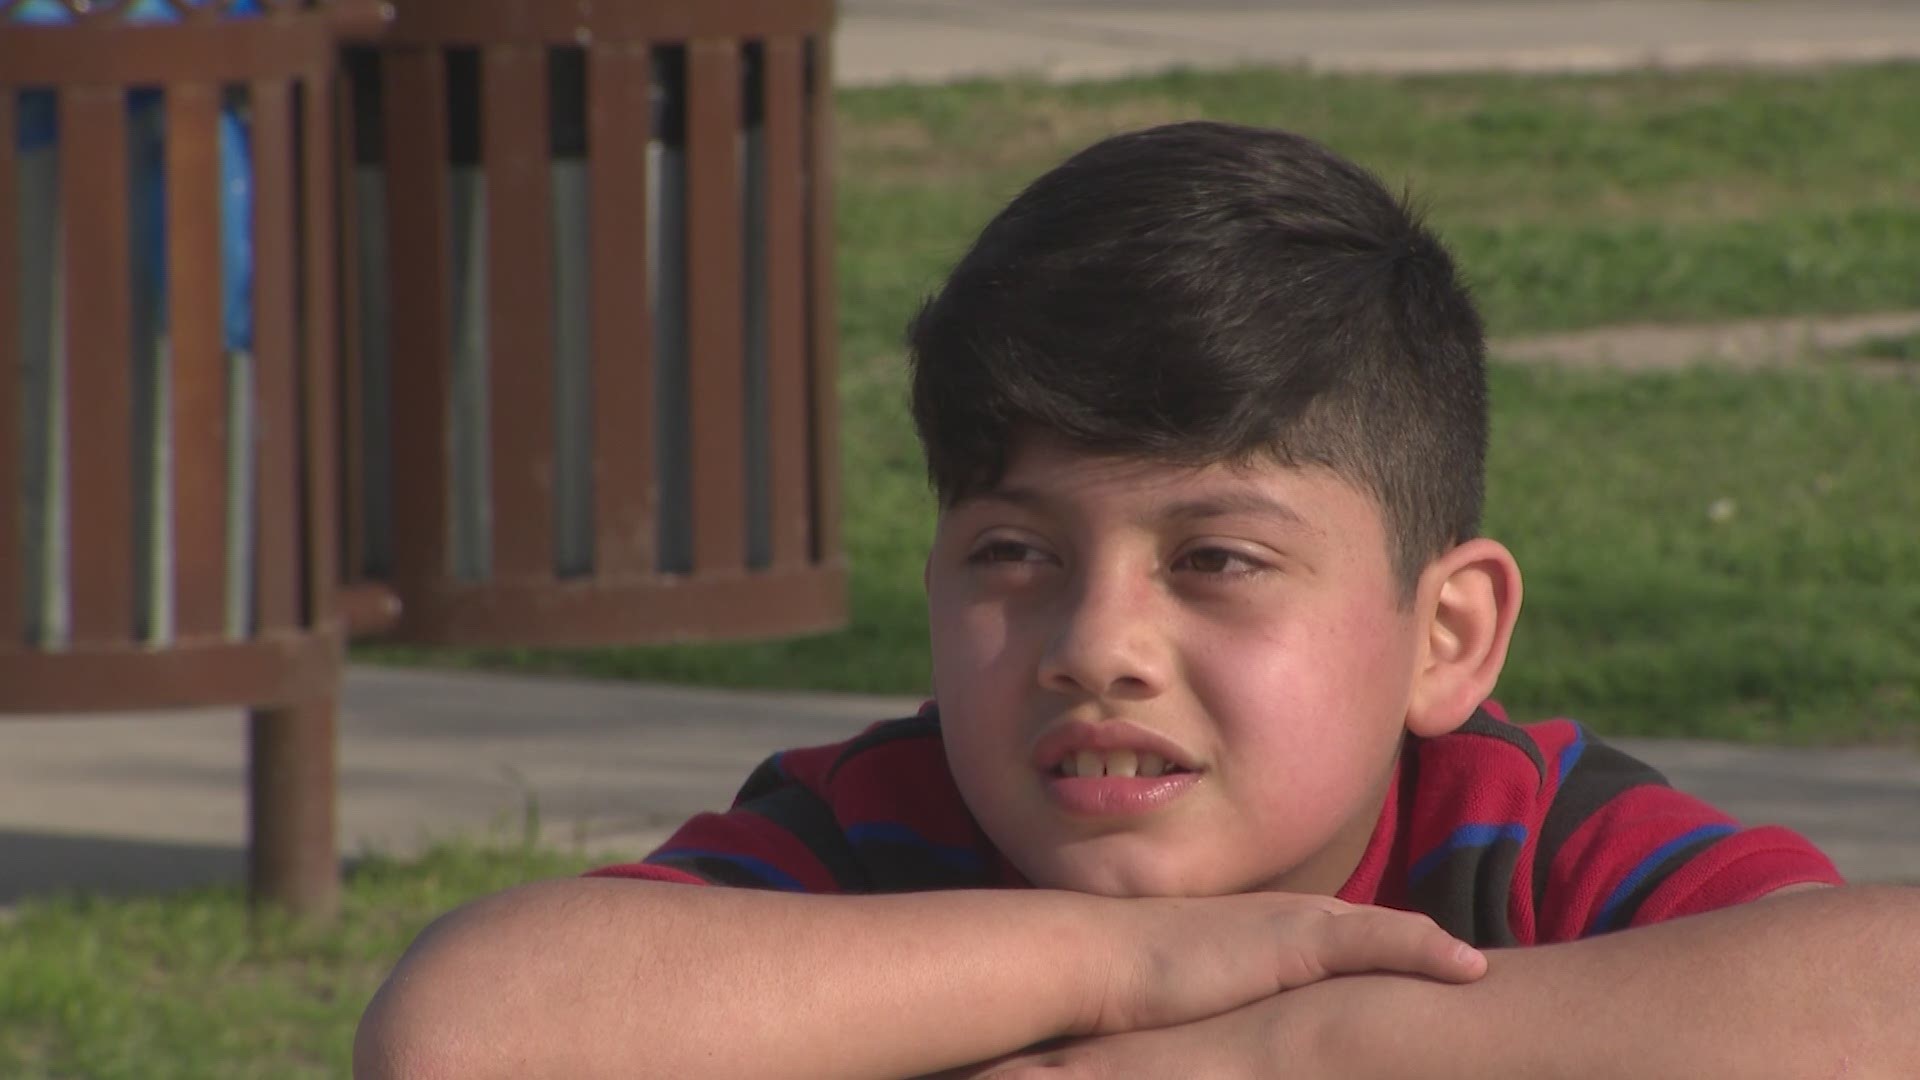 Watch this kiddo get really happy! :-) The 10-year-old is hoping to be adopted.